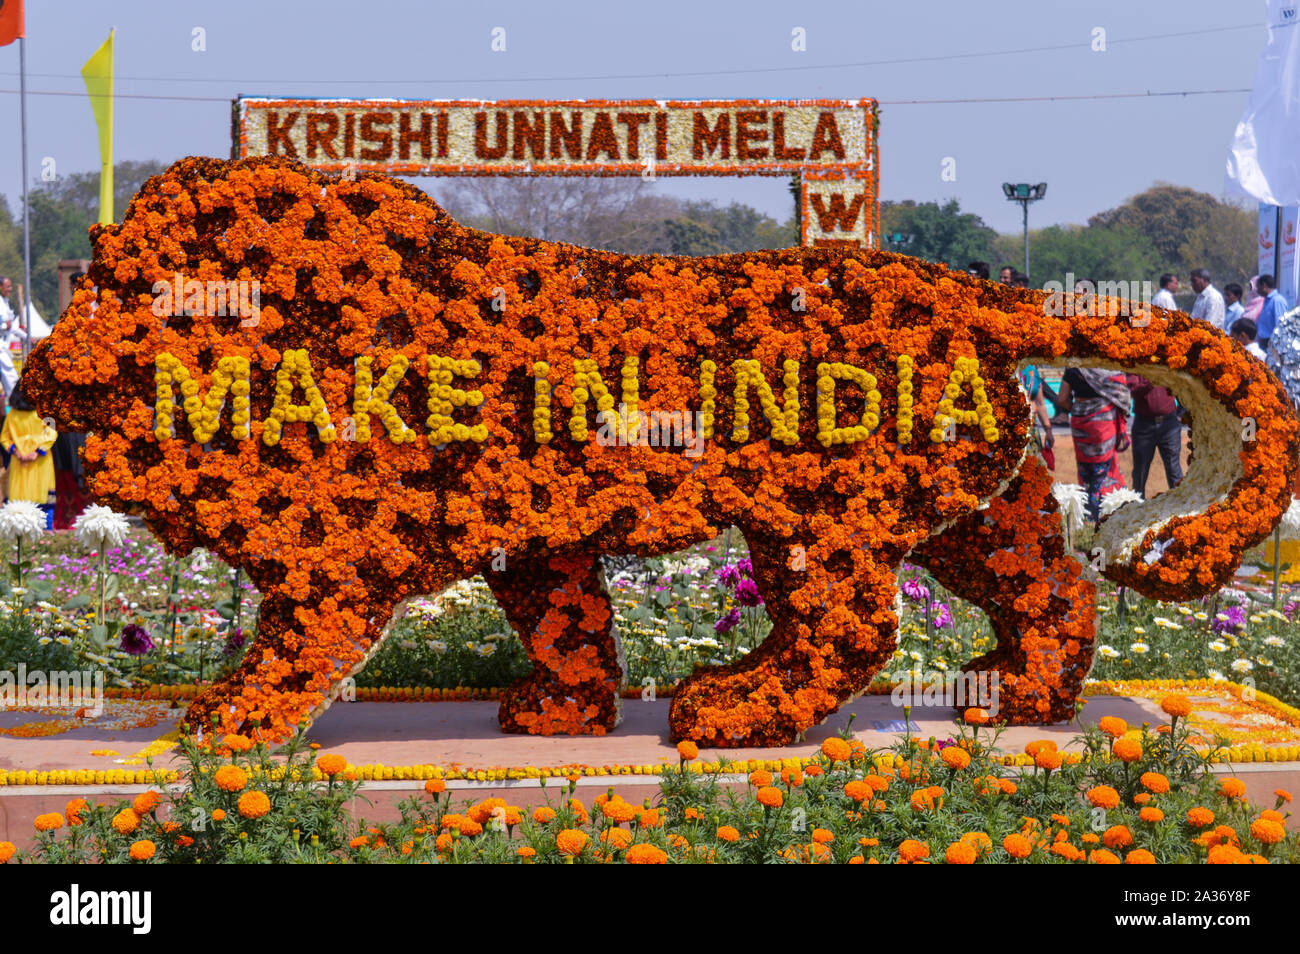 The lion which is made of cotton and news paper, flowers are there for exhibition at pusa, agriculture festival, new delhi. Stock Photo